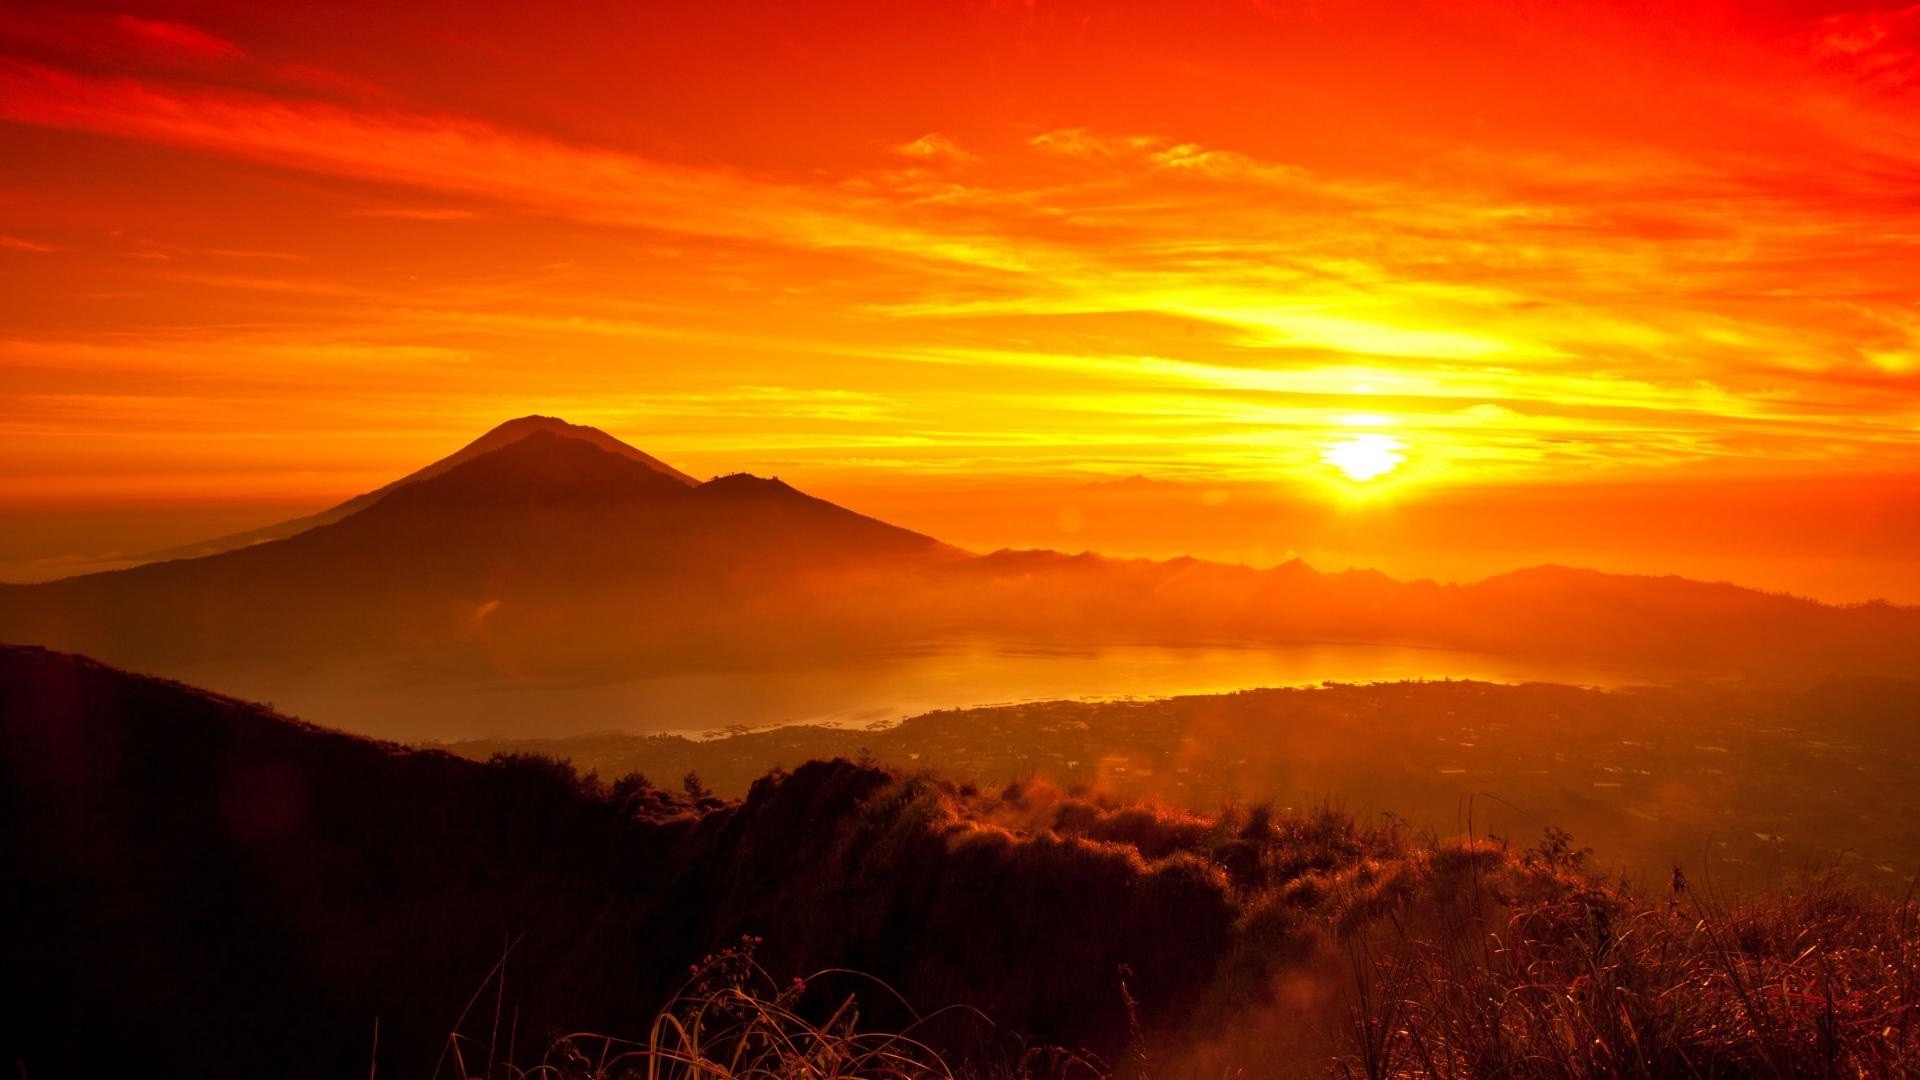 Mount Bromo Volcano Sunset View in Indonesia Photos - Download Hd ...